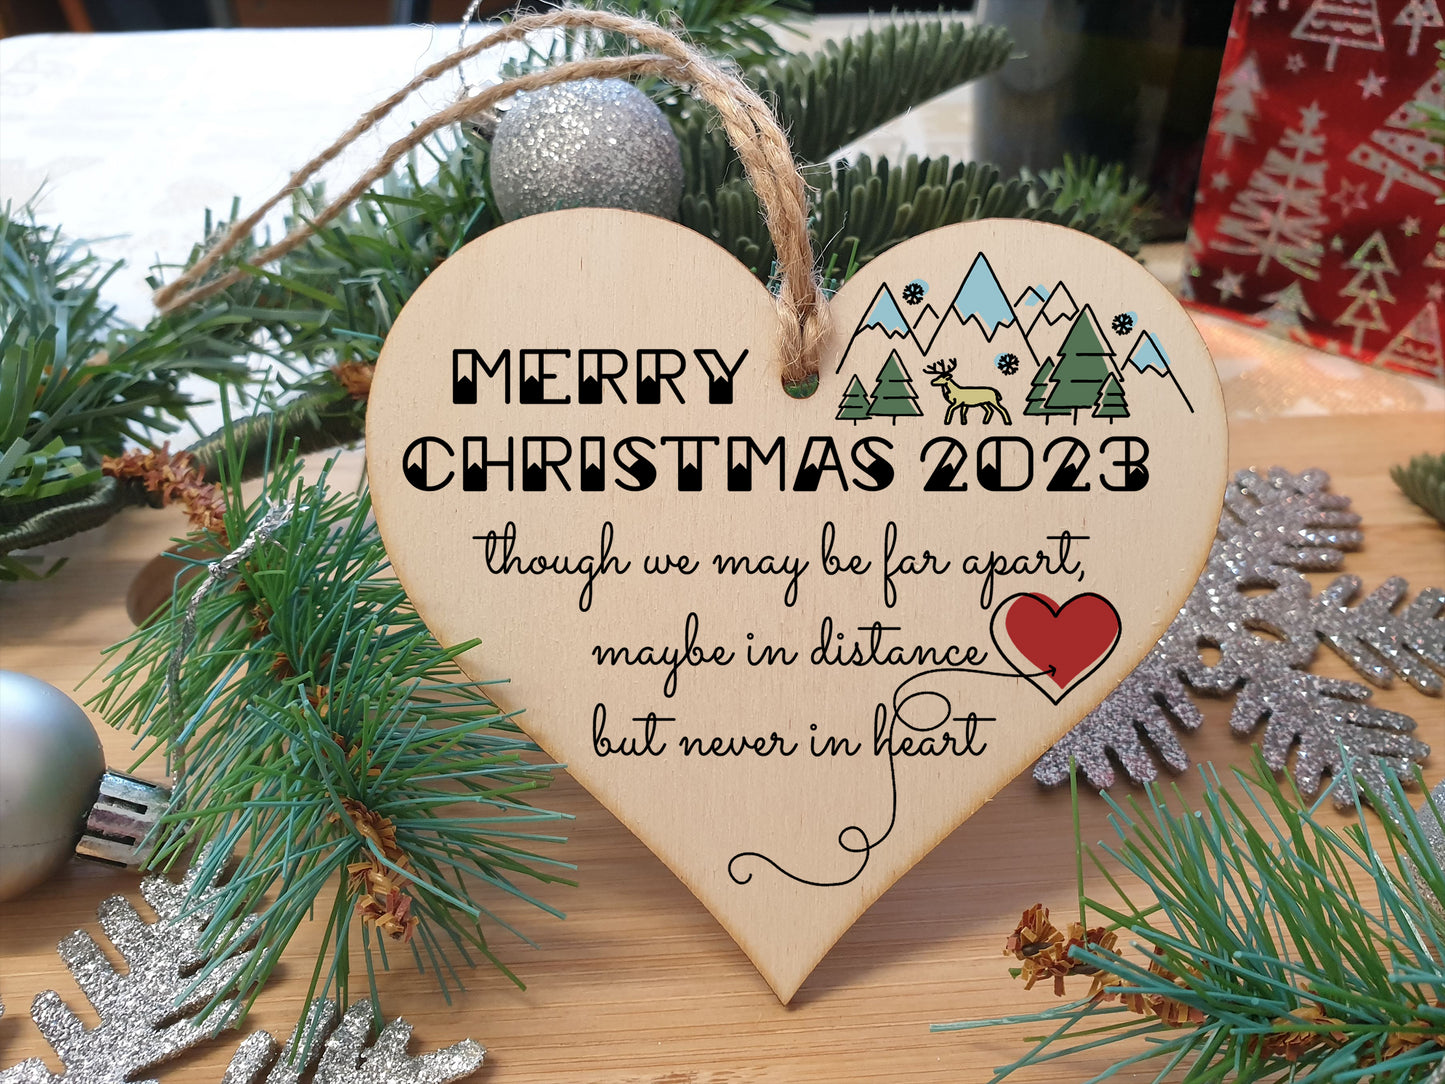 Handmade Wooden Hanging Heart Plaque Christmas Tree Bauble Though We May Be Far Apart 2022 Card Alternative Long Distance Family Friends